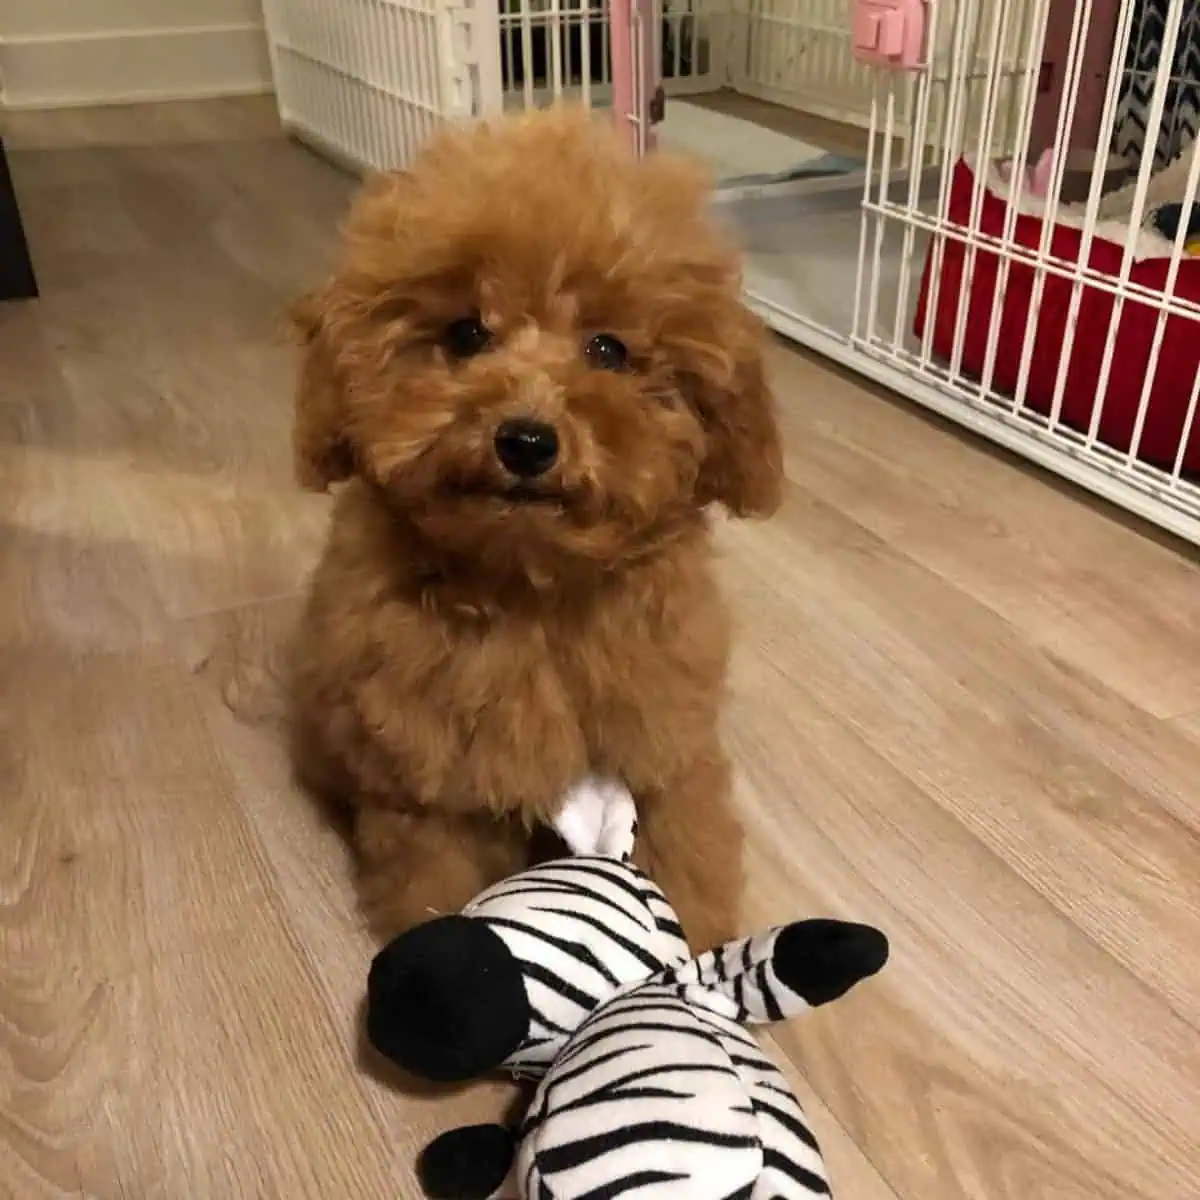 Poodle out of crate with zebra toy